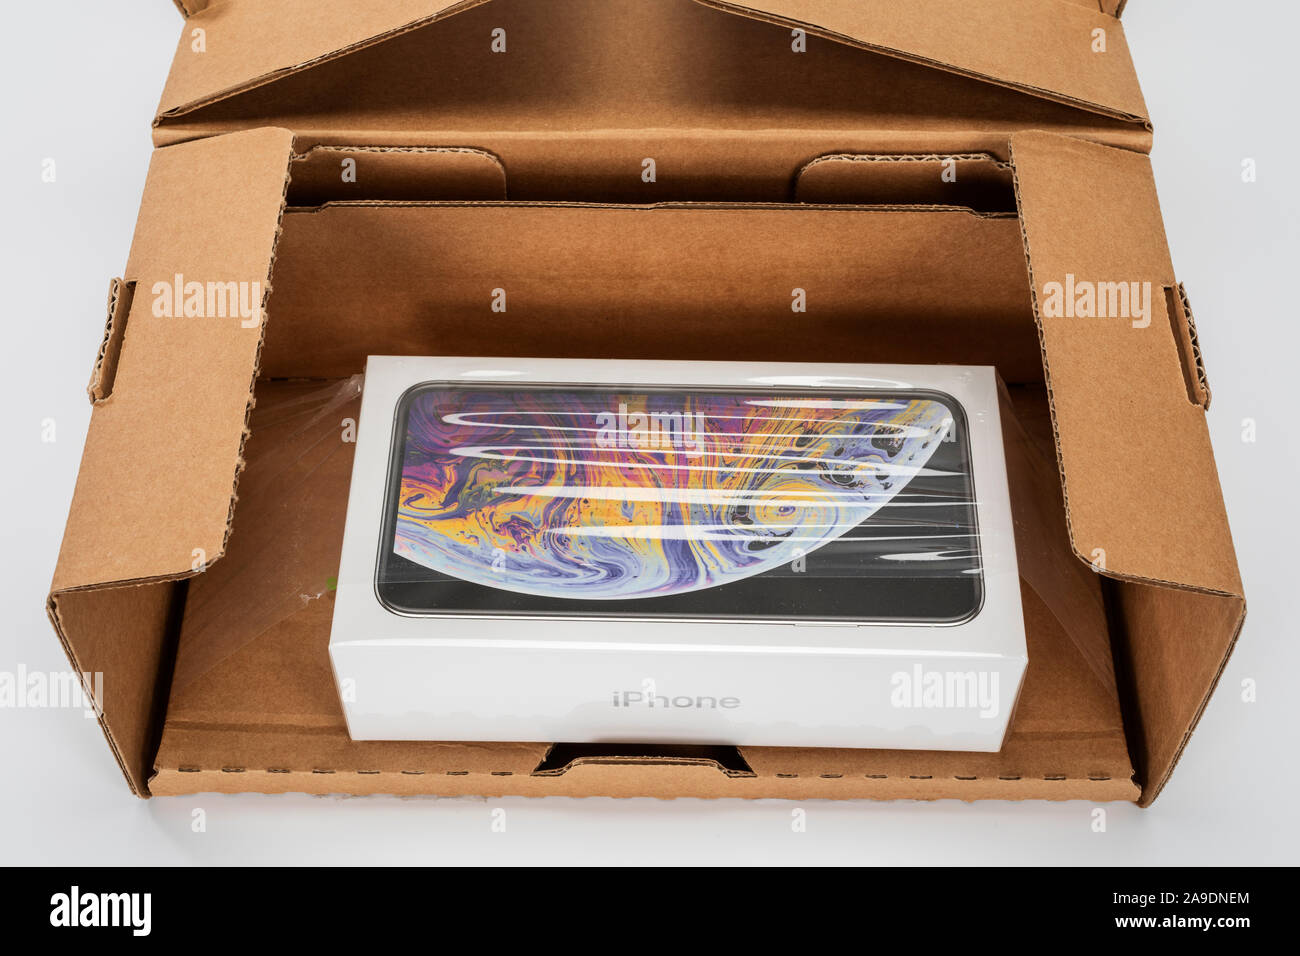 Apple iPhone XS Max in shipping box, opened, Stock Photo